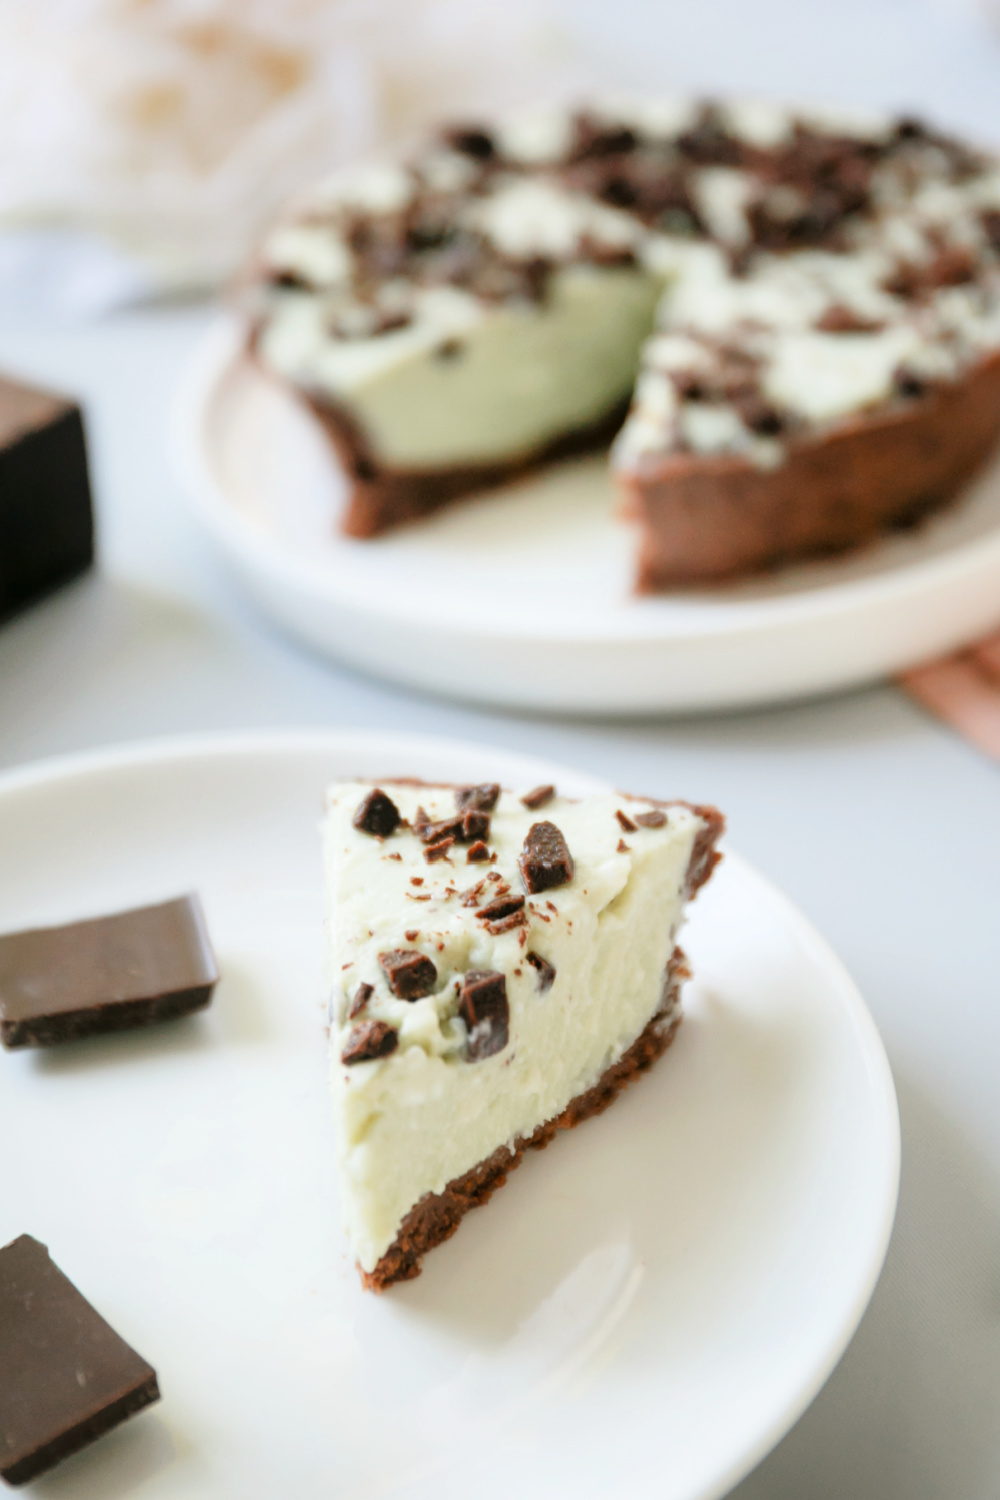 Slice of mint chocolate chip cheesecake on white plate with rest of cheesecake in background